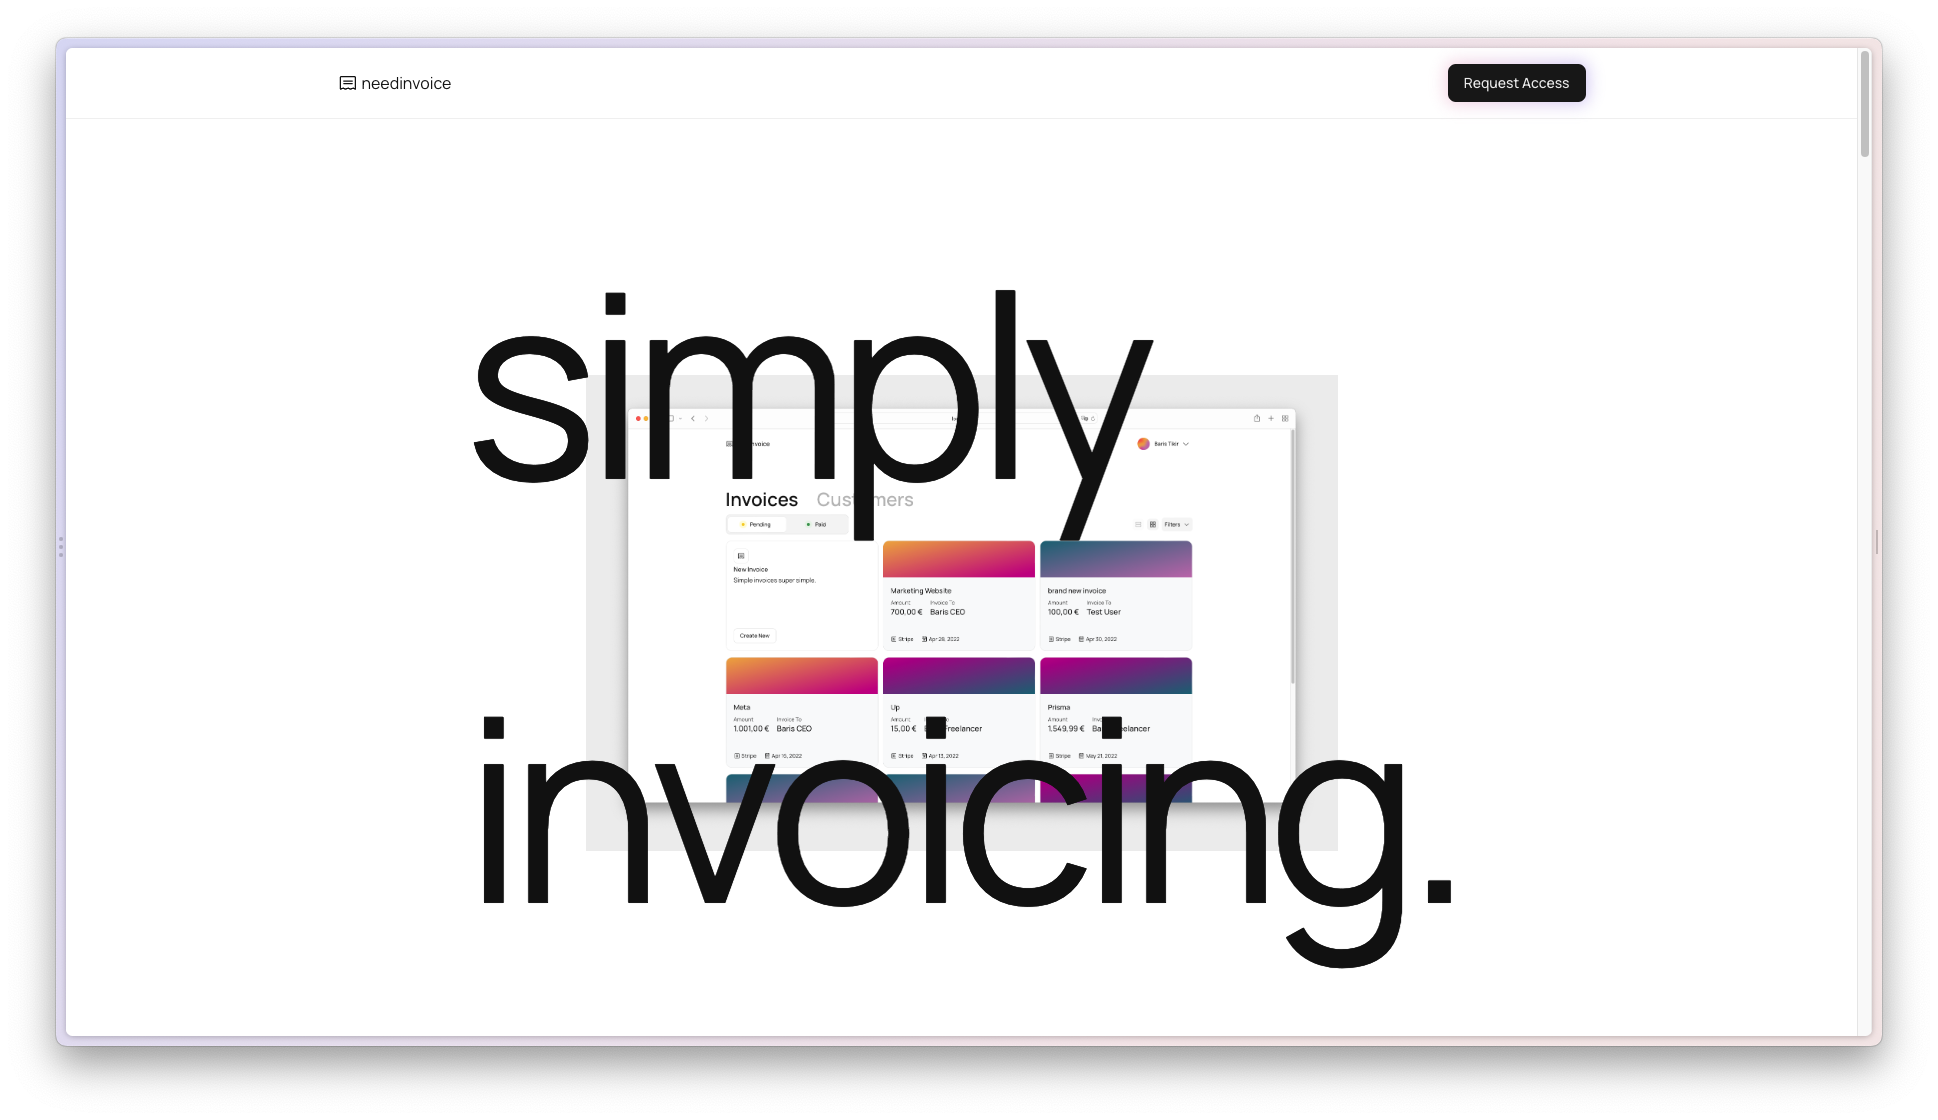 Preview of needinvoice's landing page